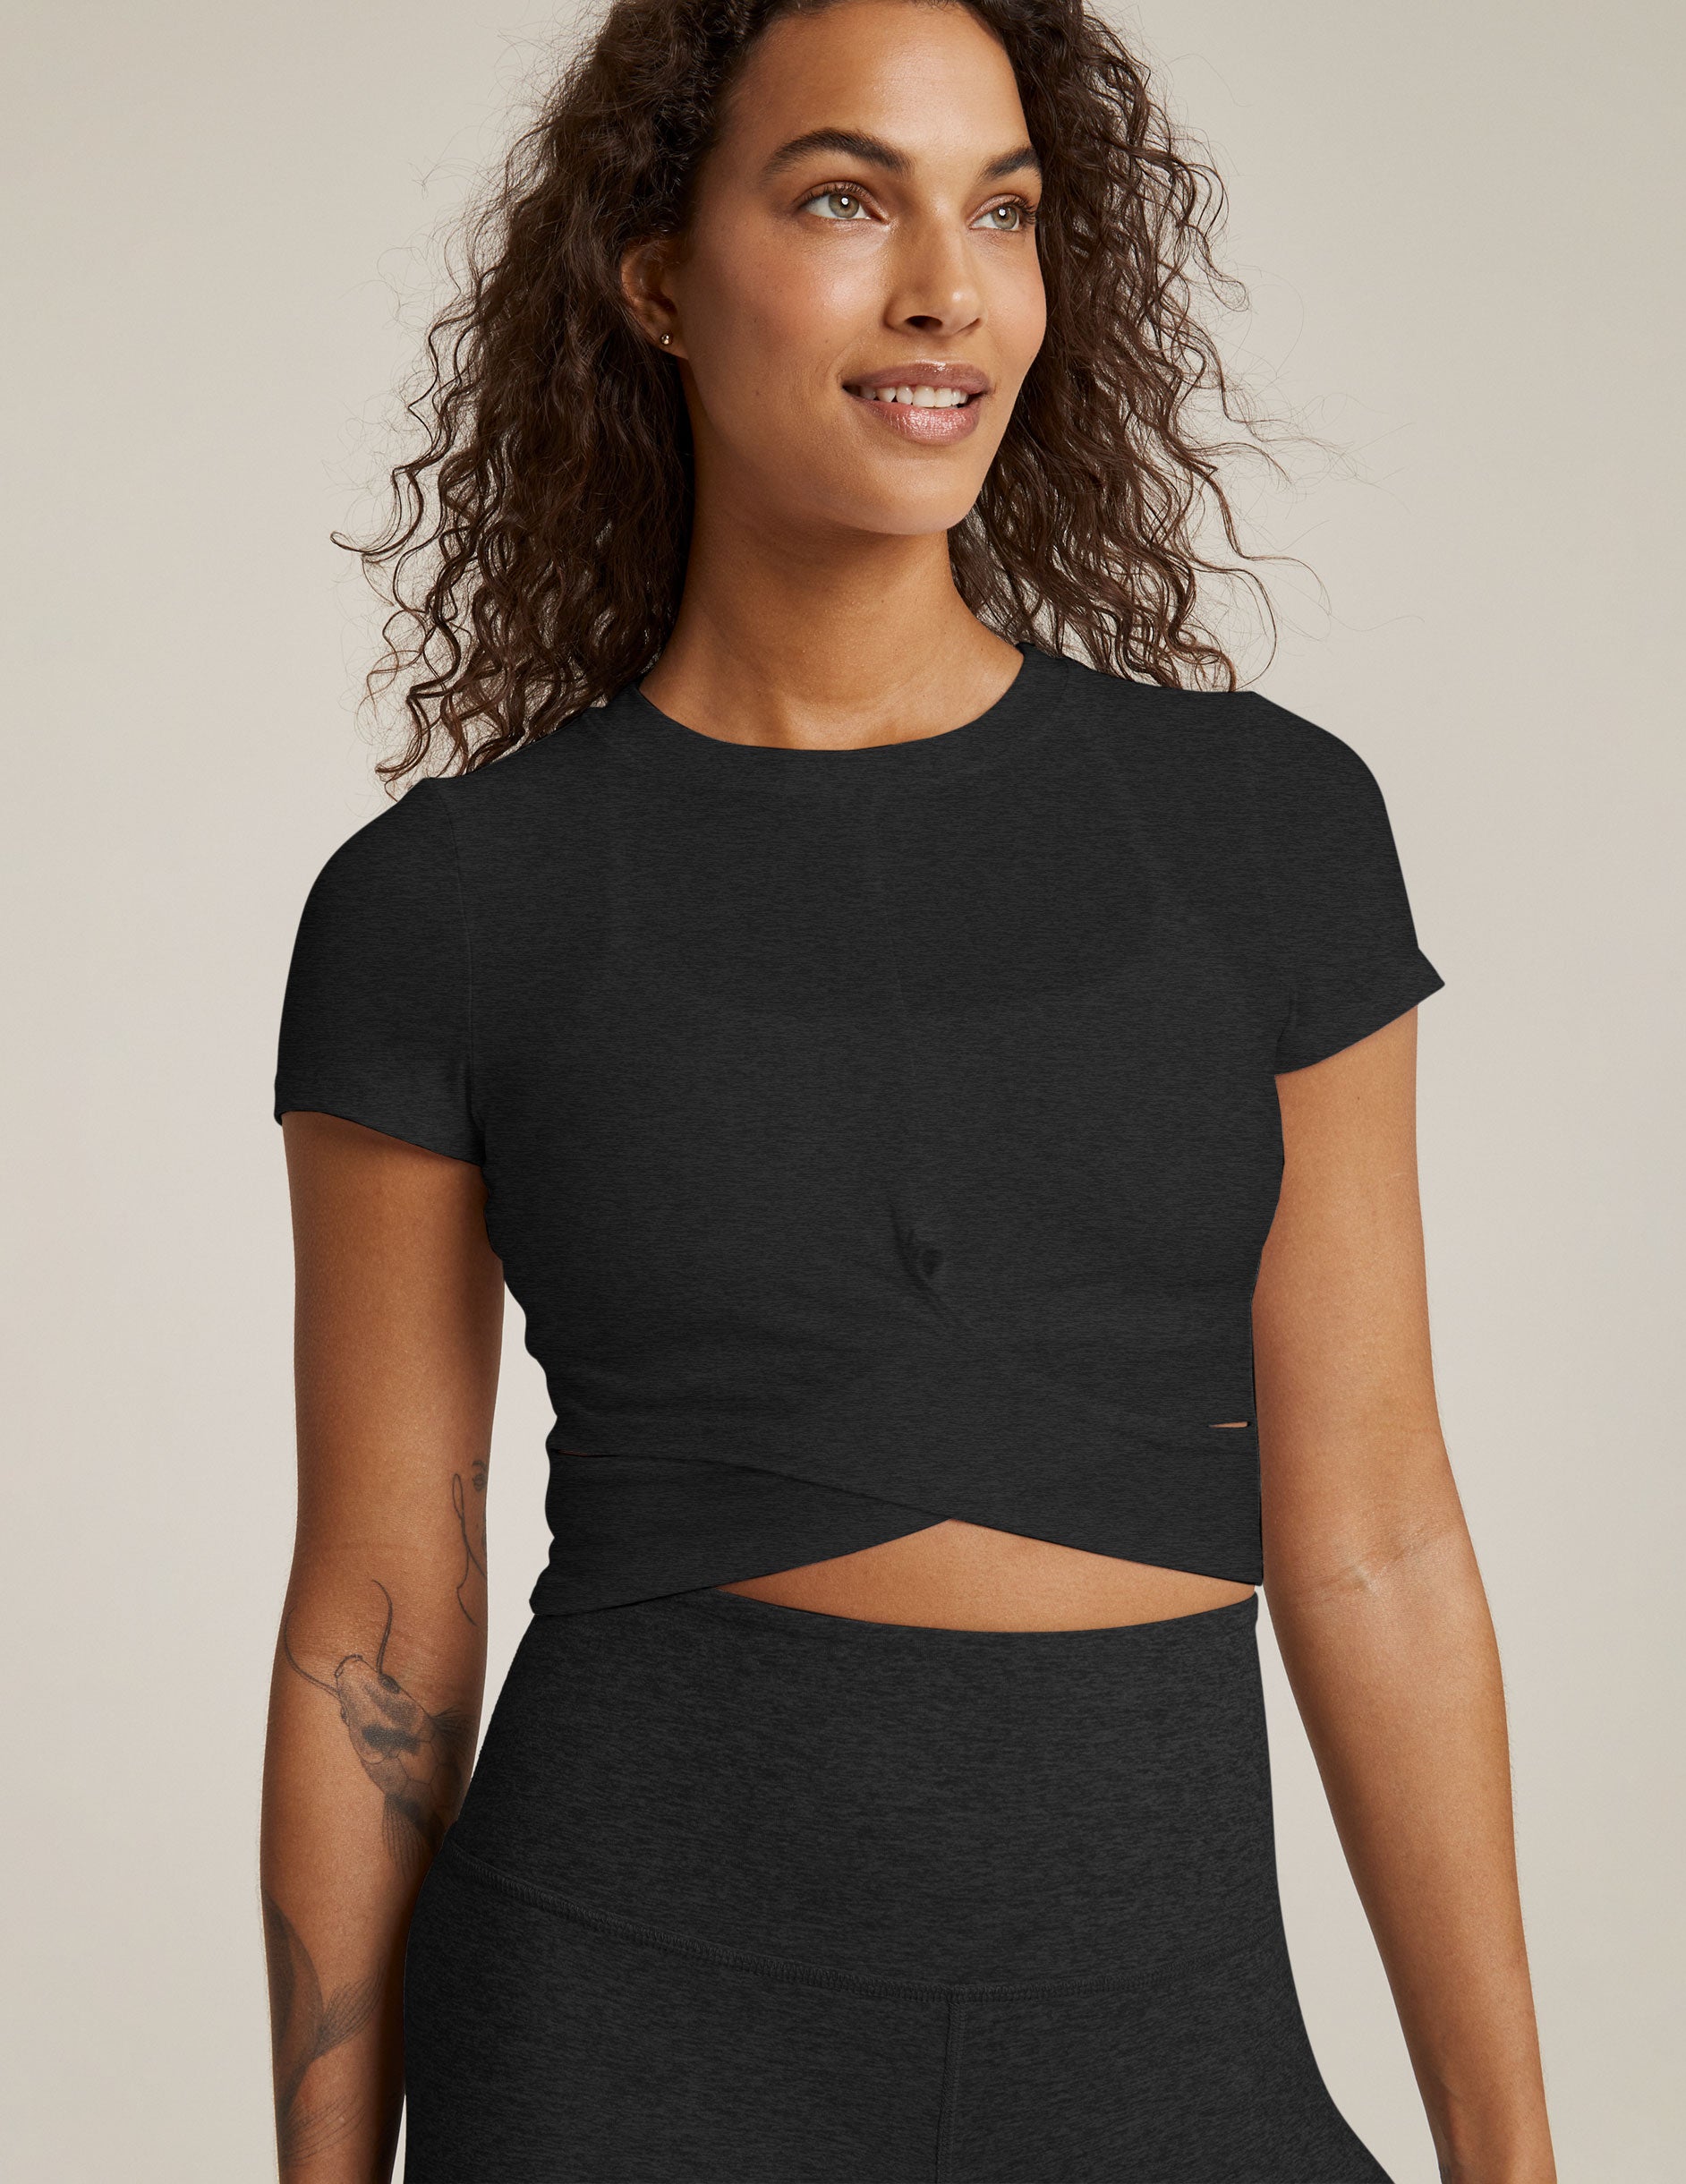 black short sleeve top with criss cross detail at front